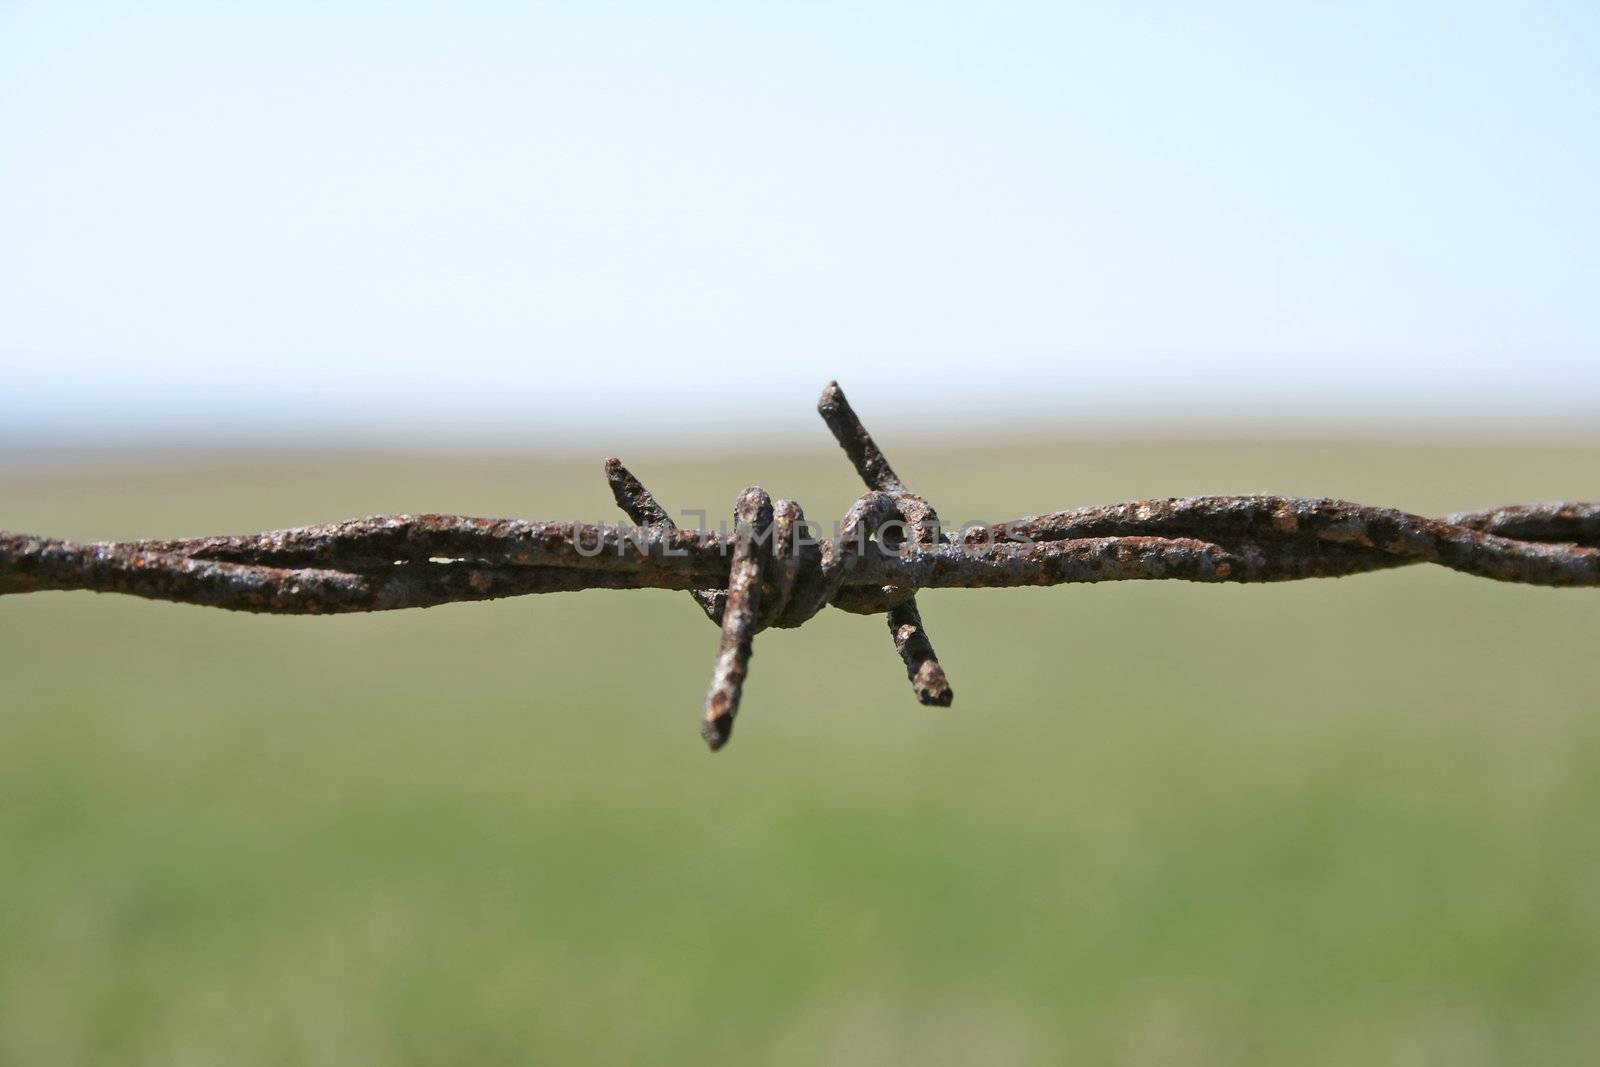 Rusty barbed wire macro. Shallow depth of field with blurry field and sky in the background.